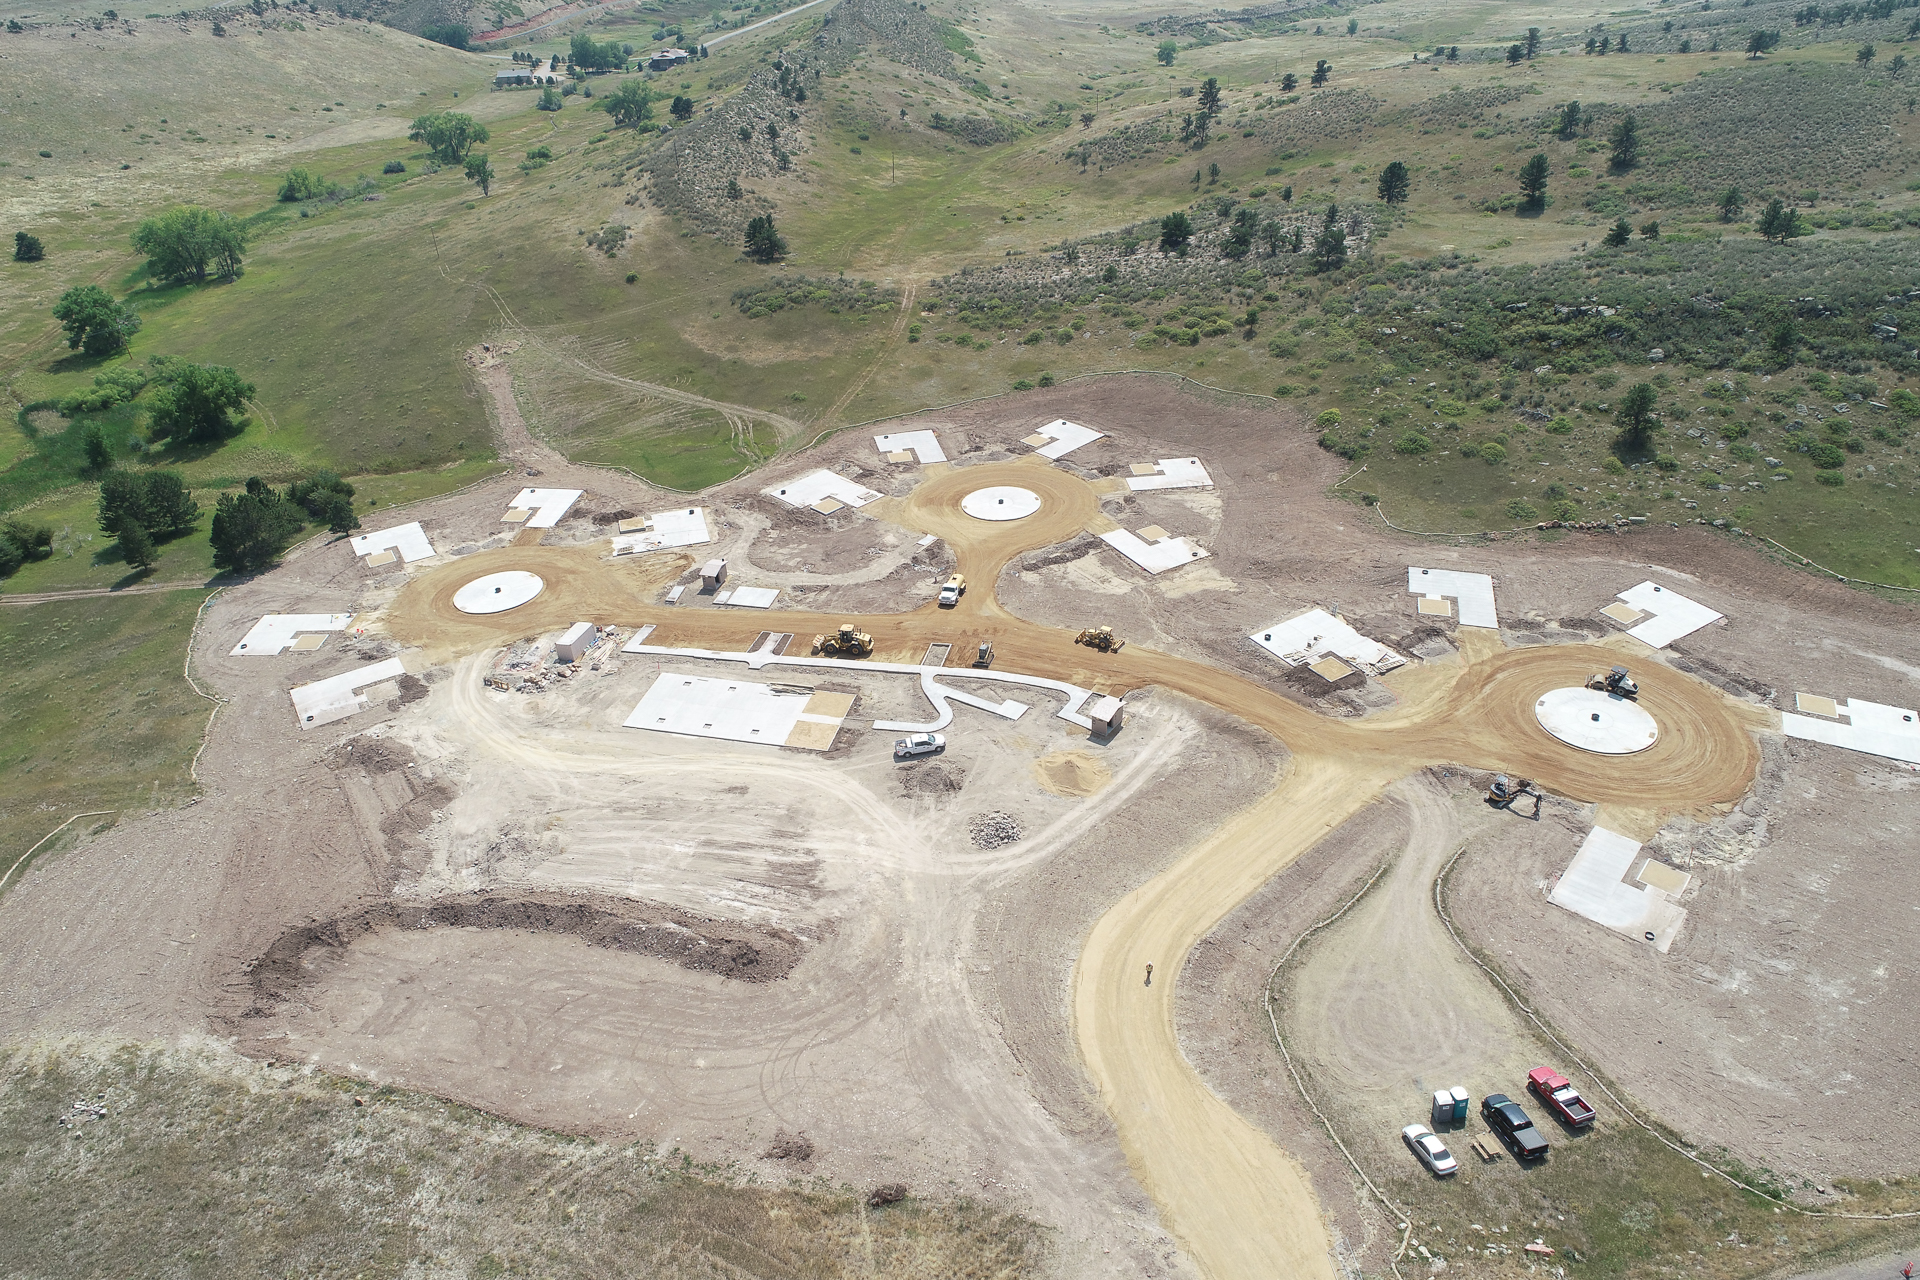 Campground under construction with sites outlined